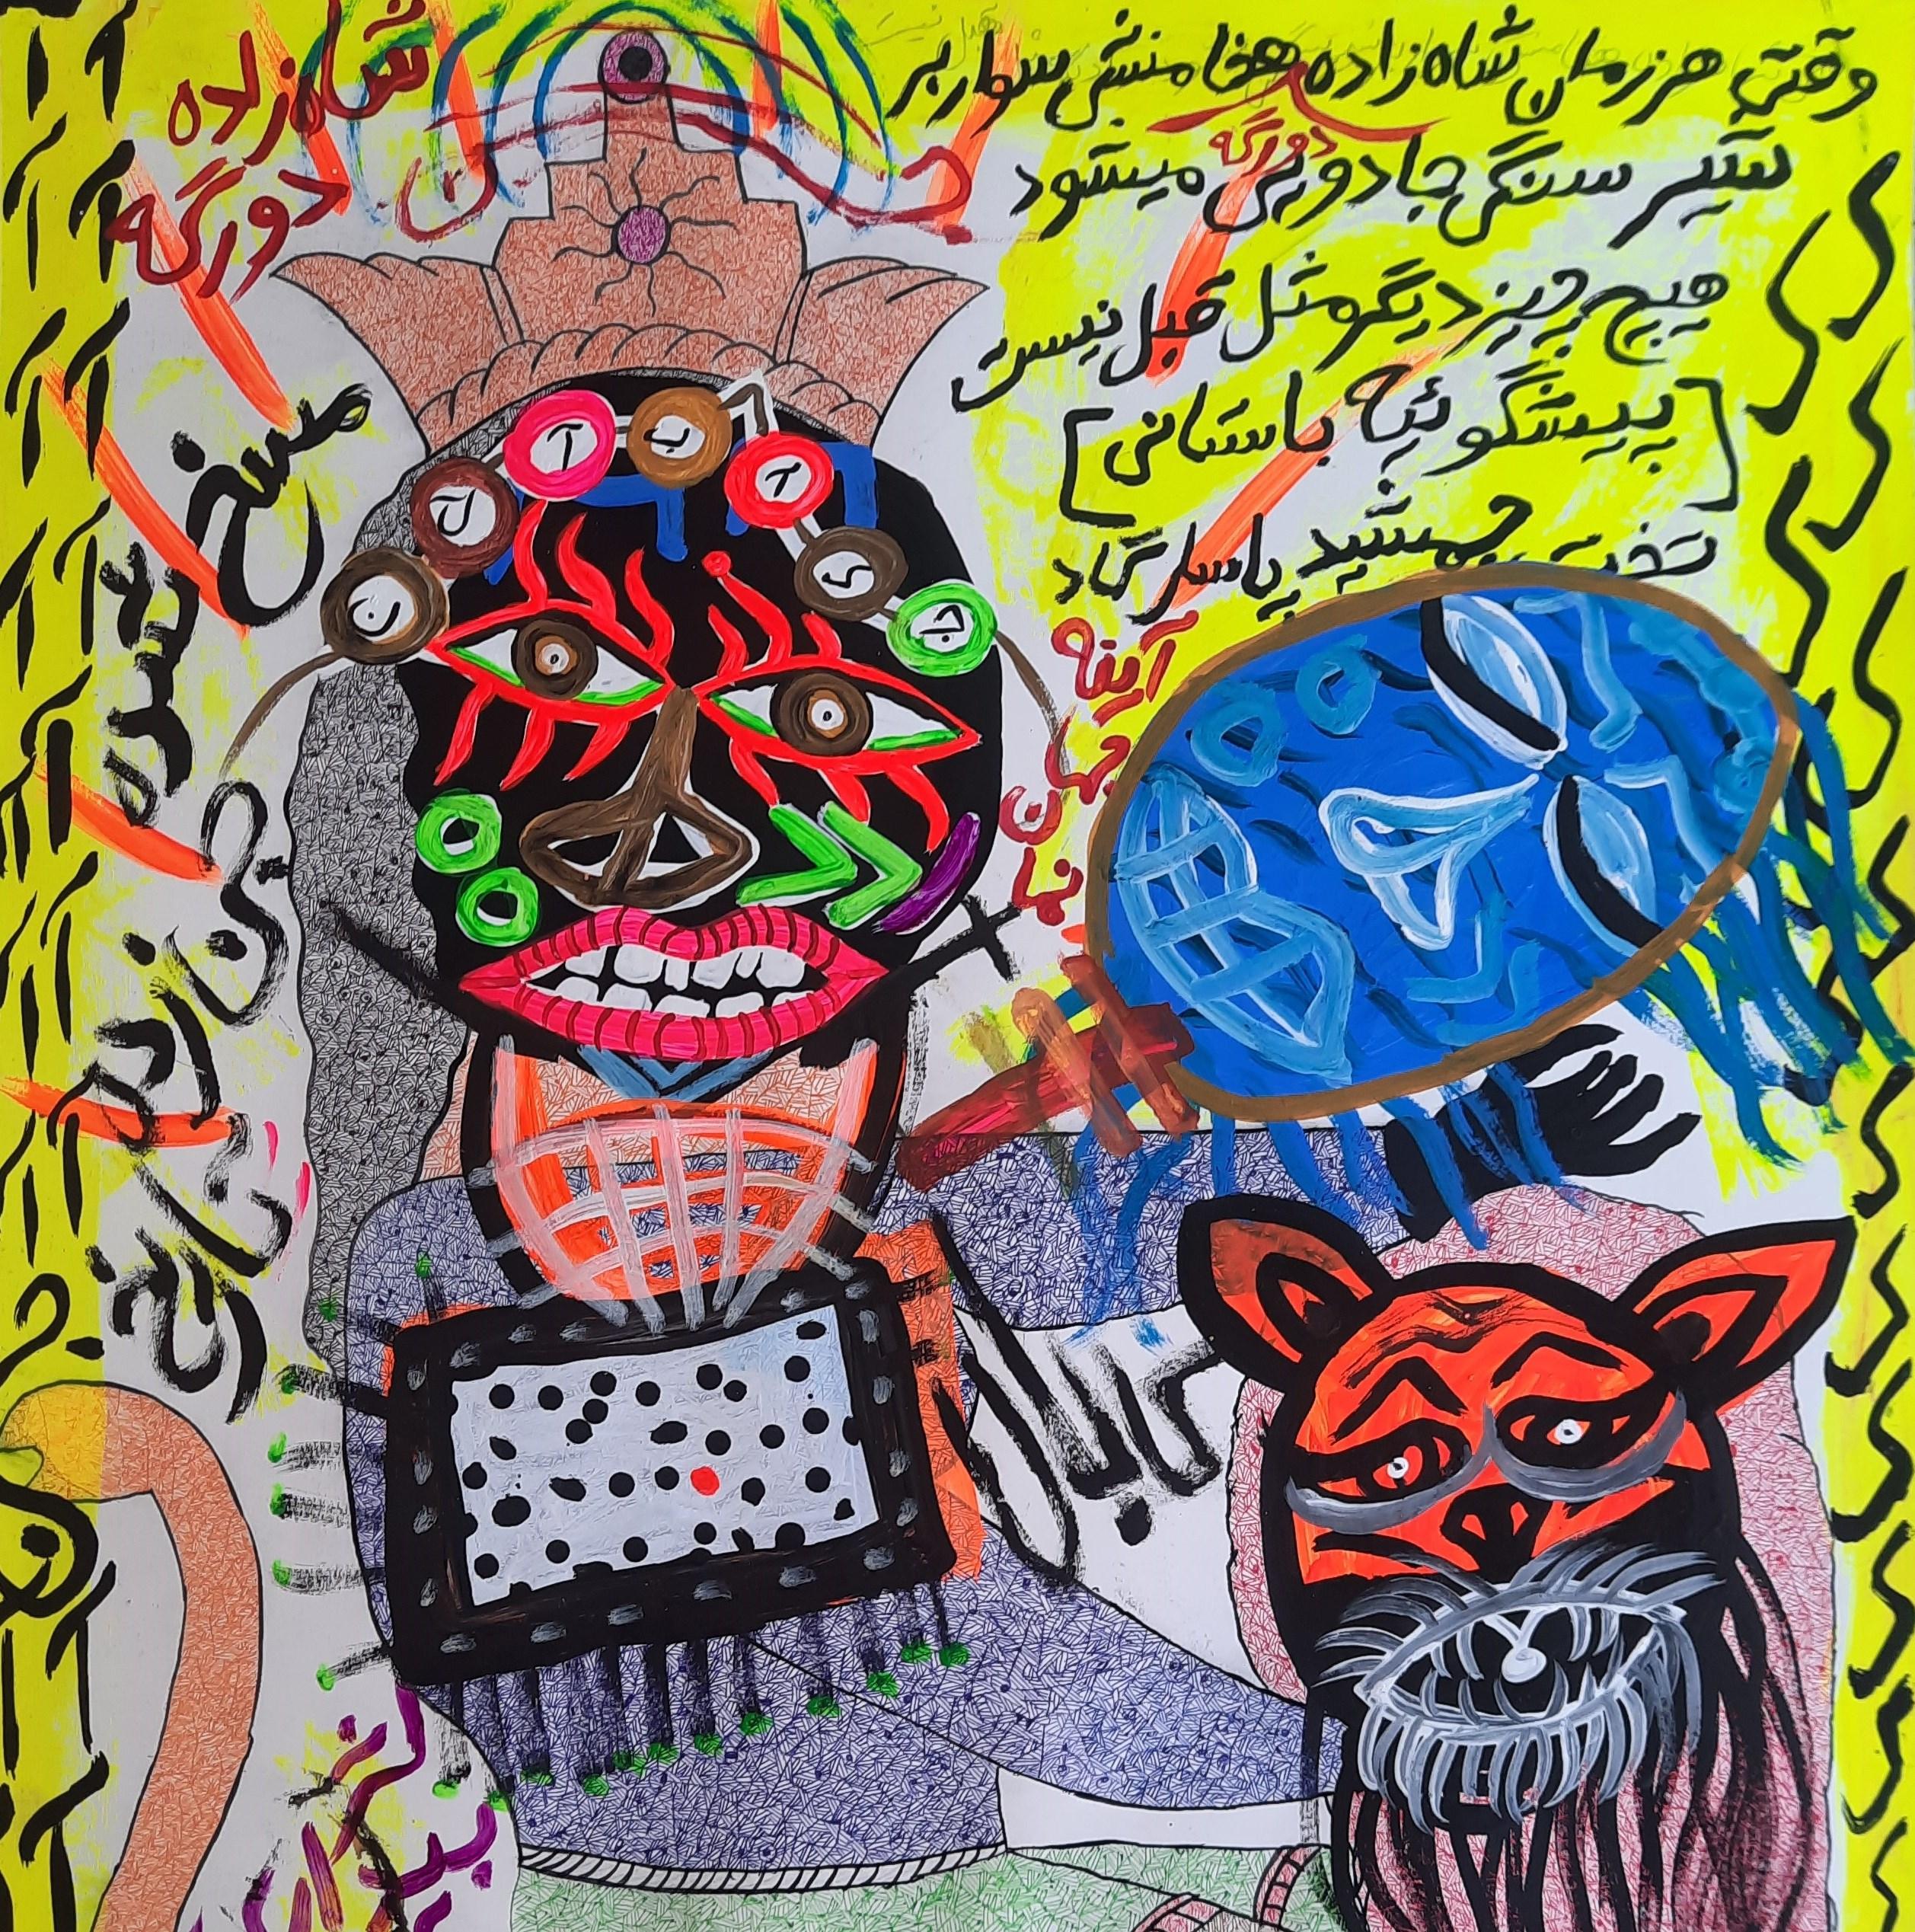 Acrylic paint on paper
Hand-signed

« Here the barbaric or savage ceremonies of New Guinea take on the air of Rio carnival.
Here the vitality bursts and the colors dance the jig while thundering.
A charivari of African masks, children's drawings and